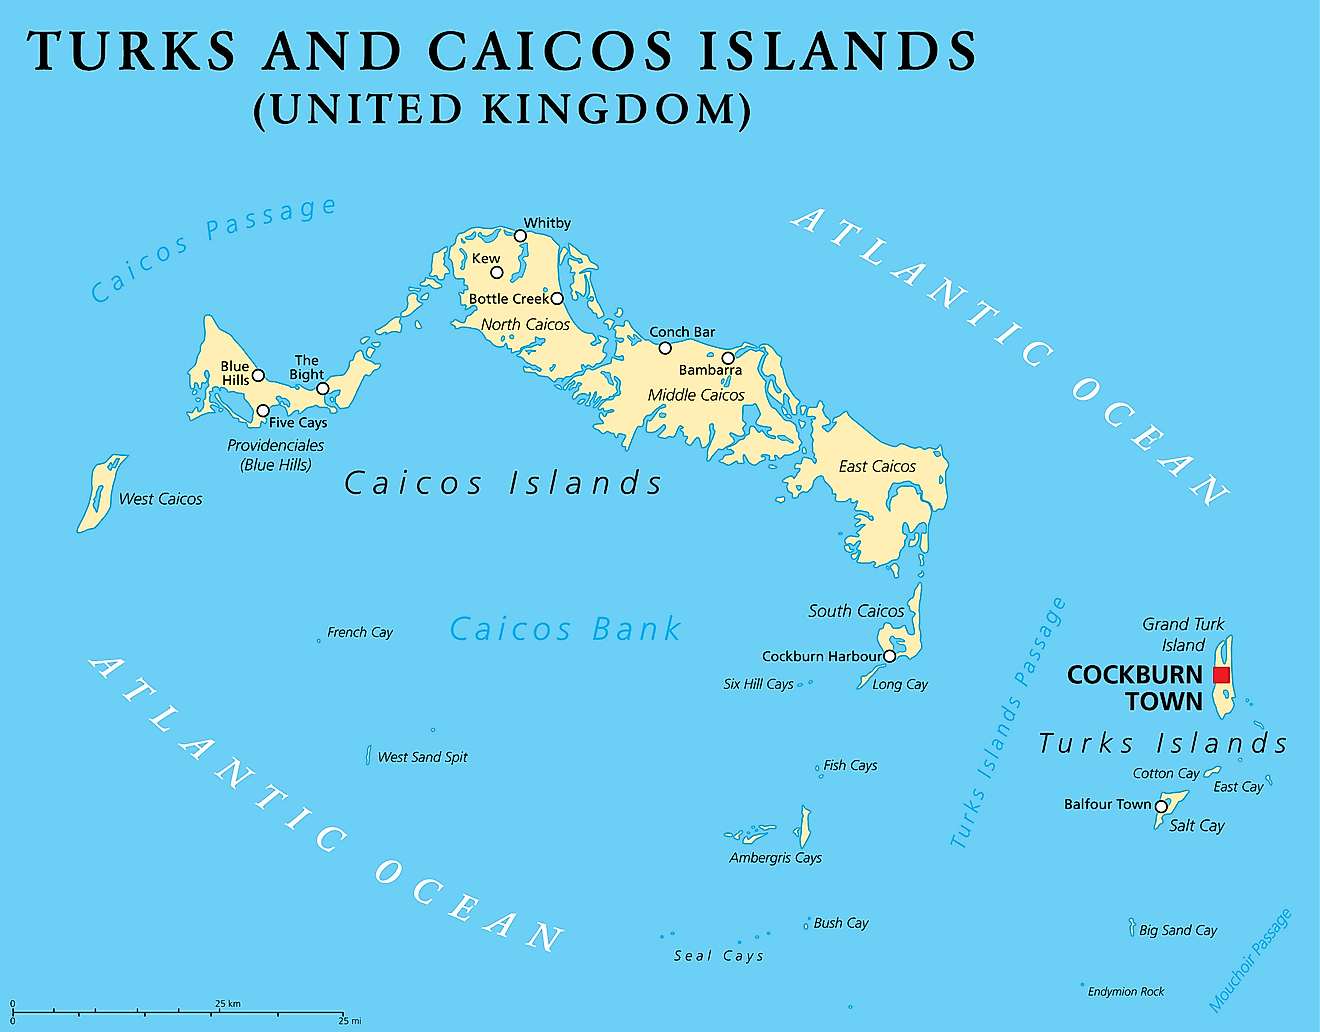 Political Map of Turks and Caicos showing its 5 districts, the Grand Turk Island, and capital of Cockburn Town.